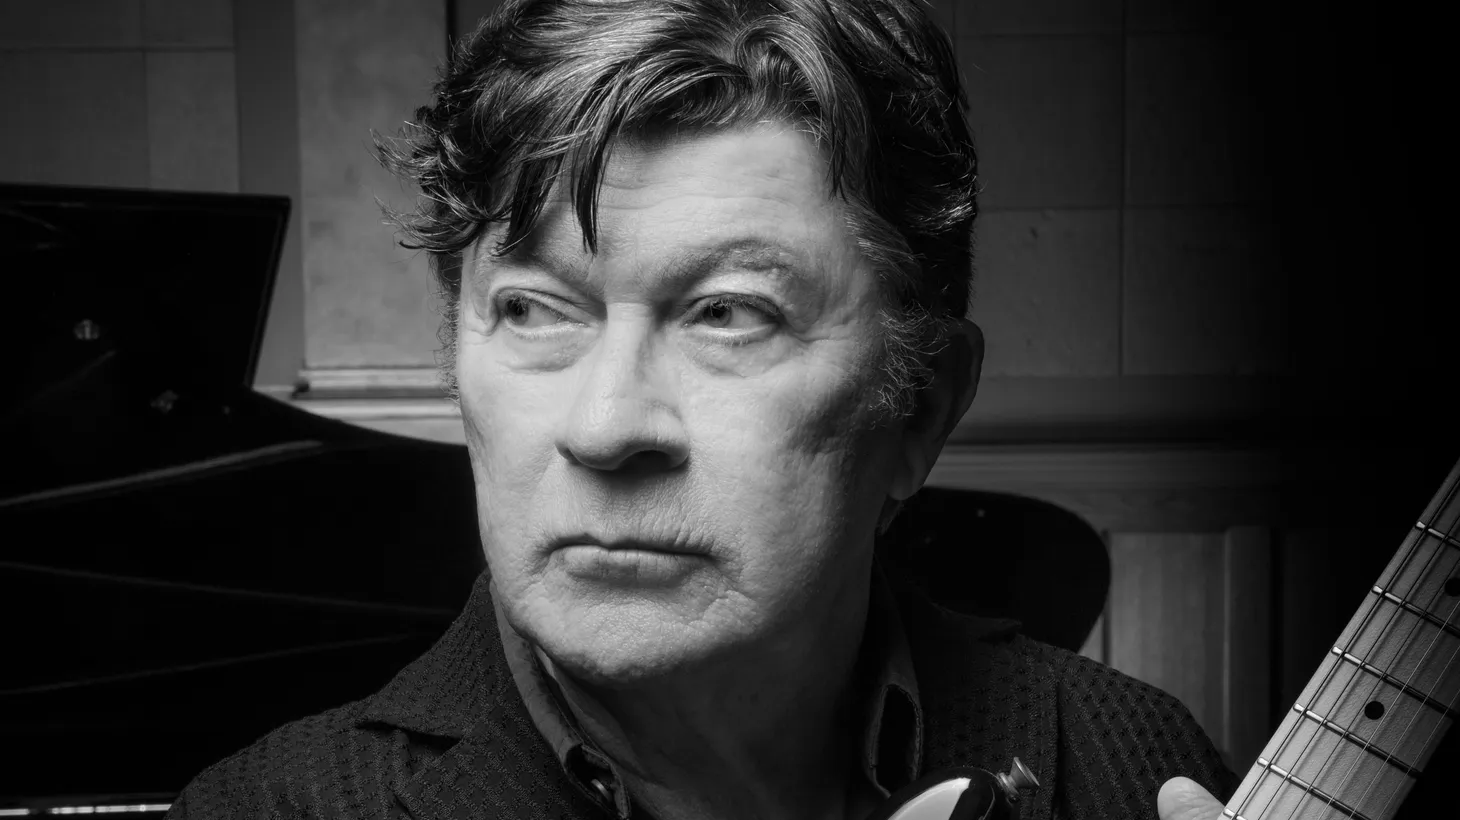 Singer and guitarist Robbie Robertson visits Morning Becomes Eclectic at 10am to talk about the lasting influence of the iconic concert film The Last Waltz, which was released 40 years ago.